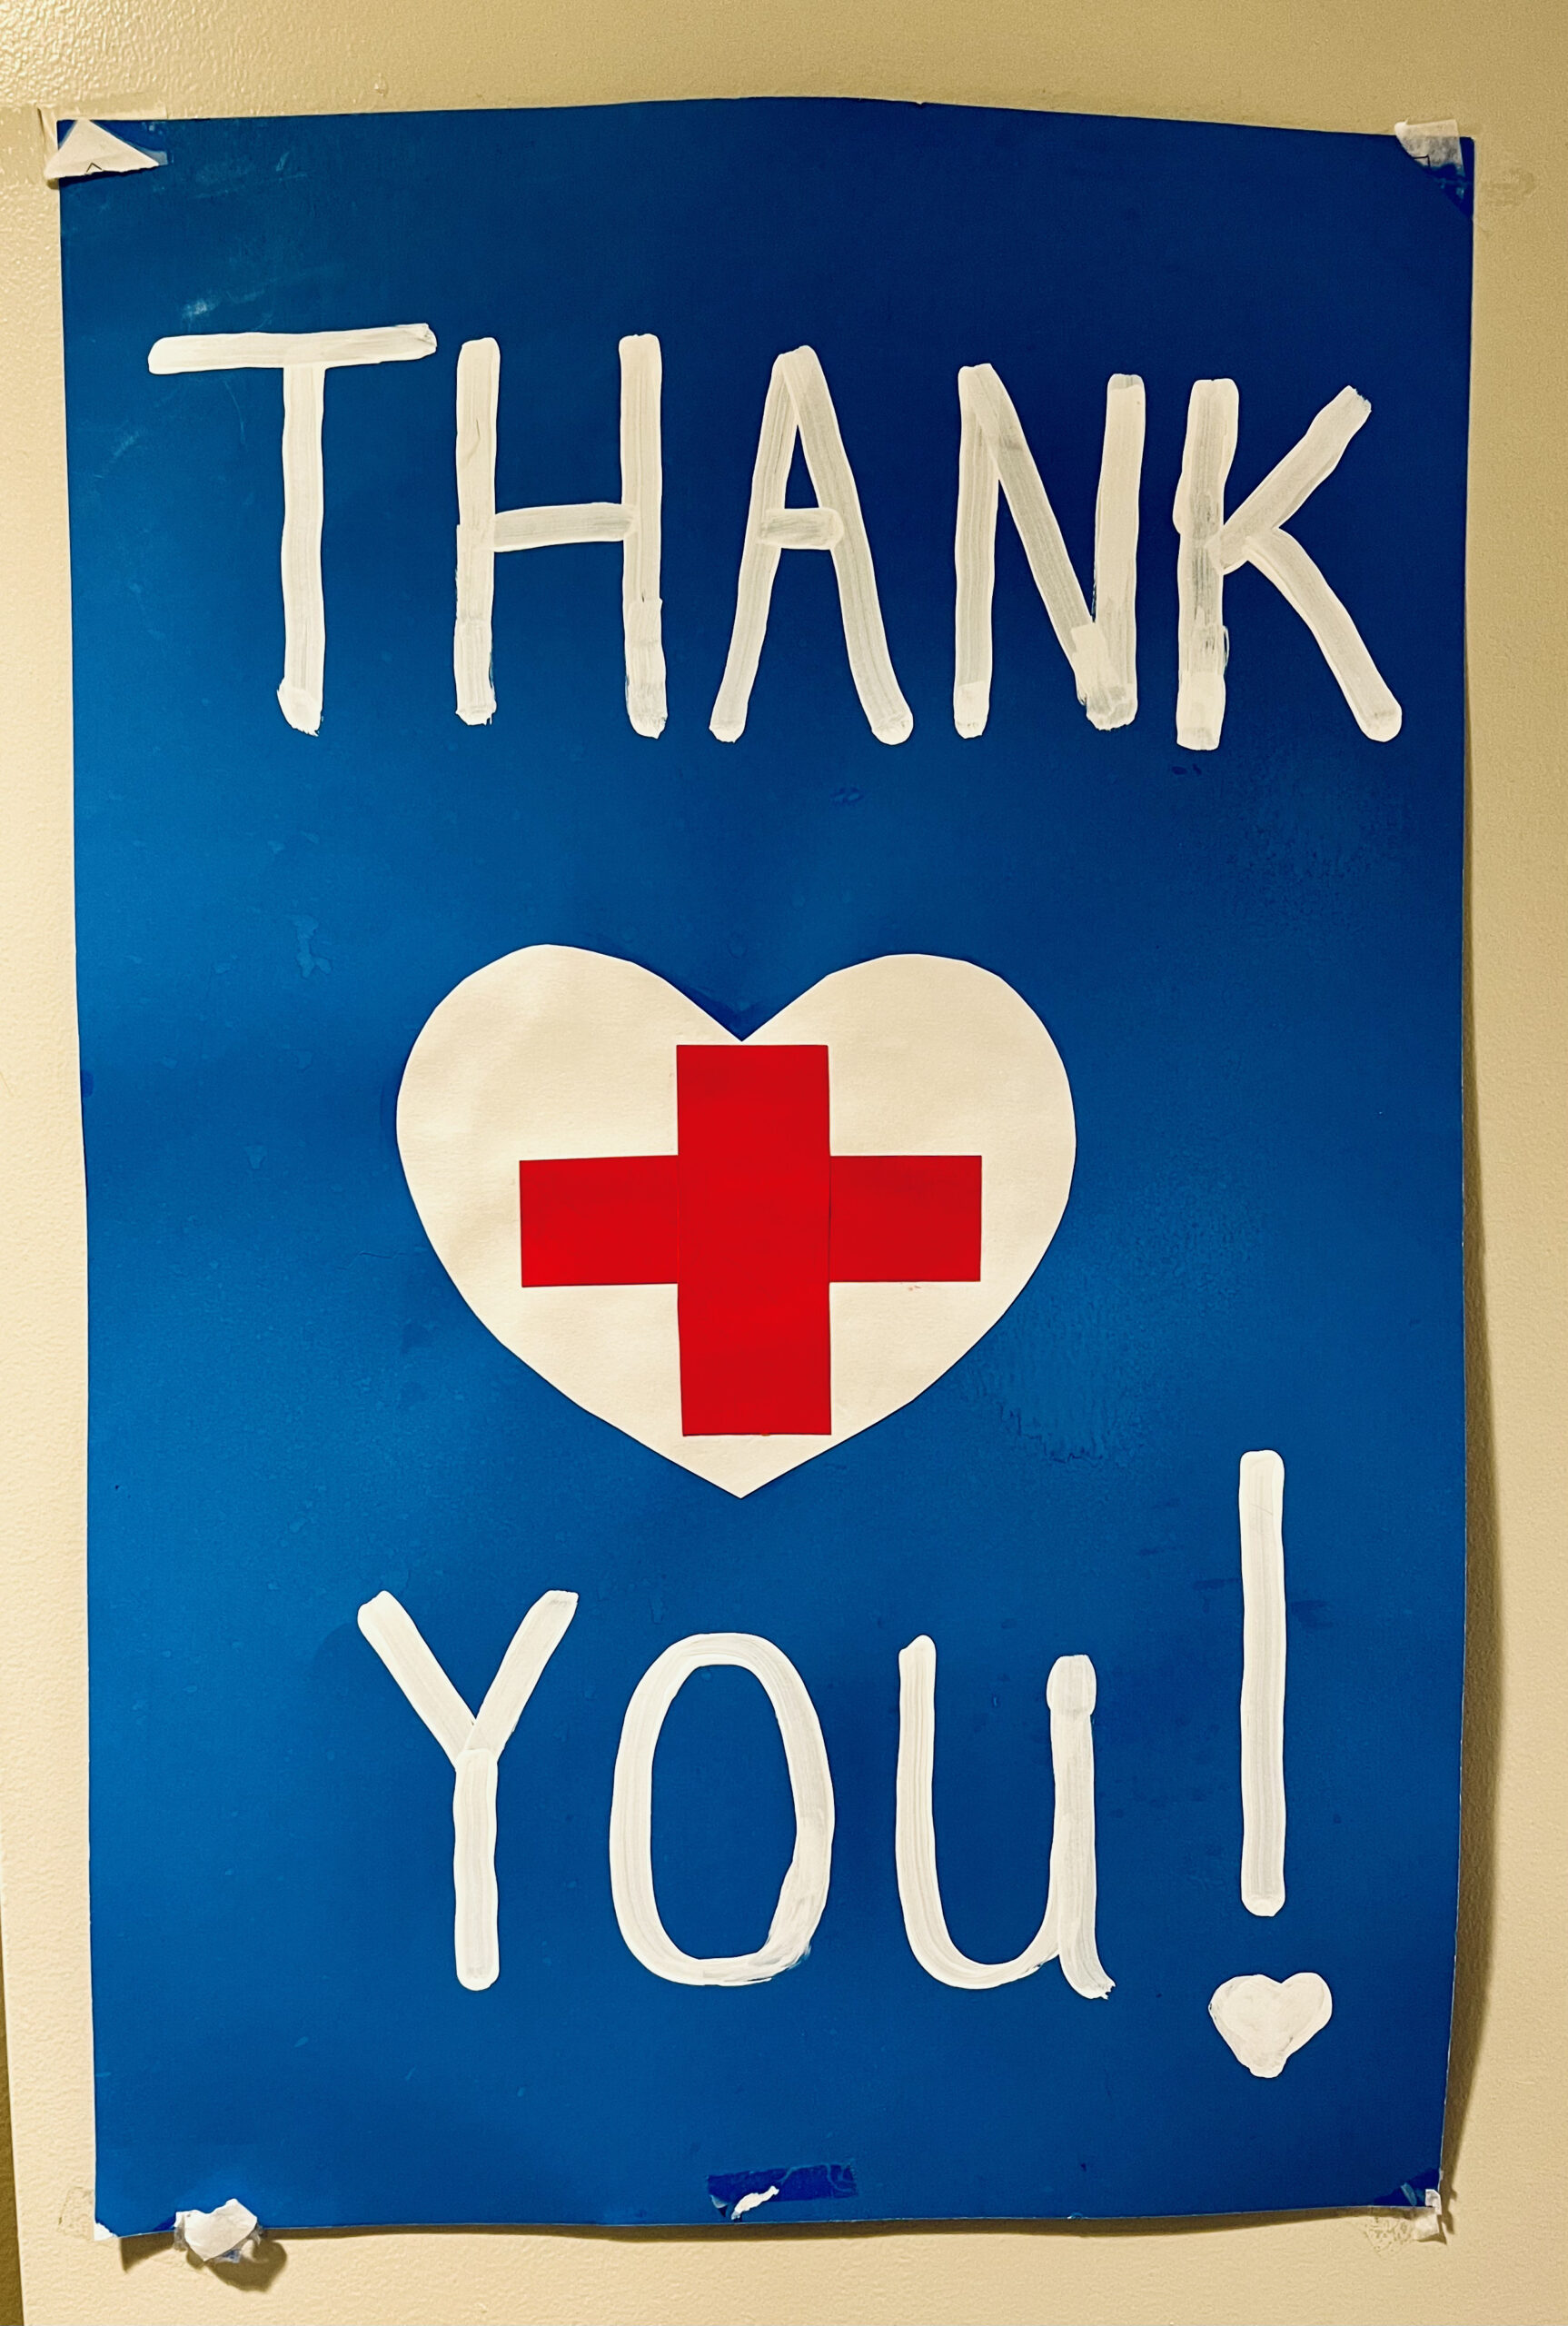 A blue, white, and red “Thank You!” poster for all health-care workers.